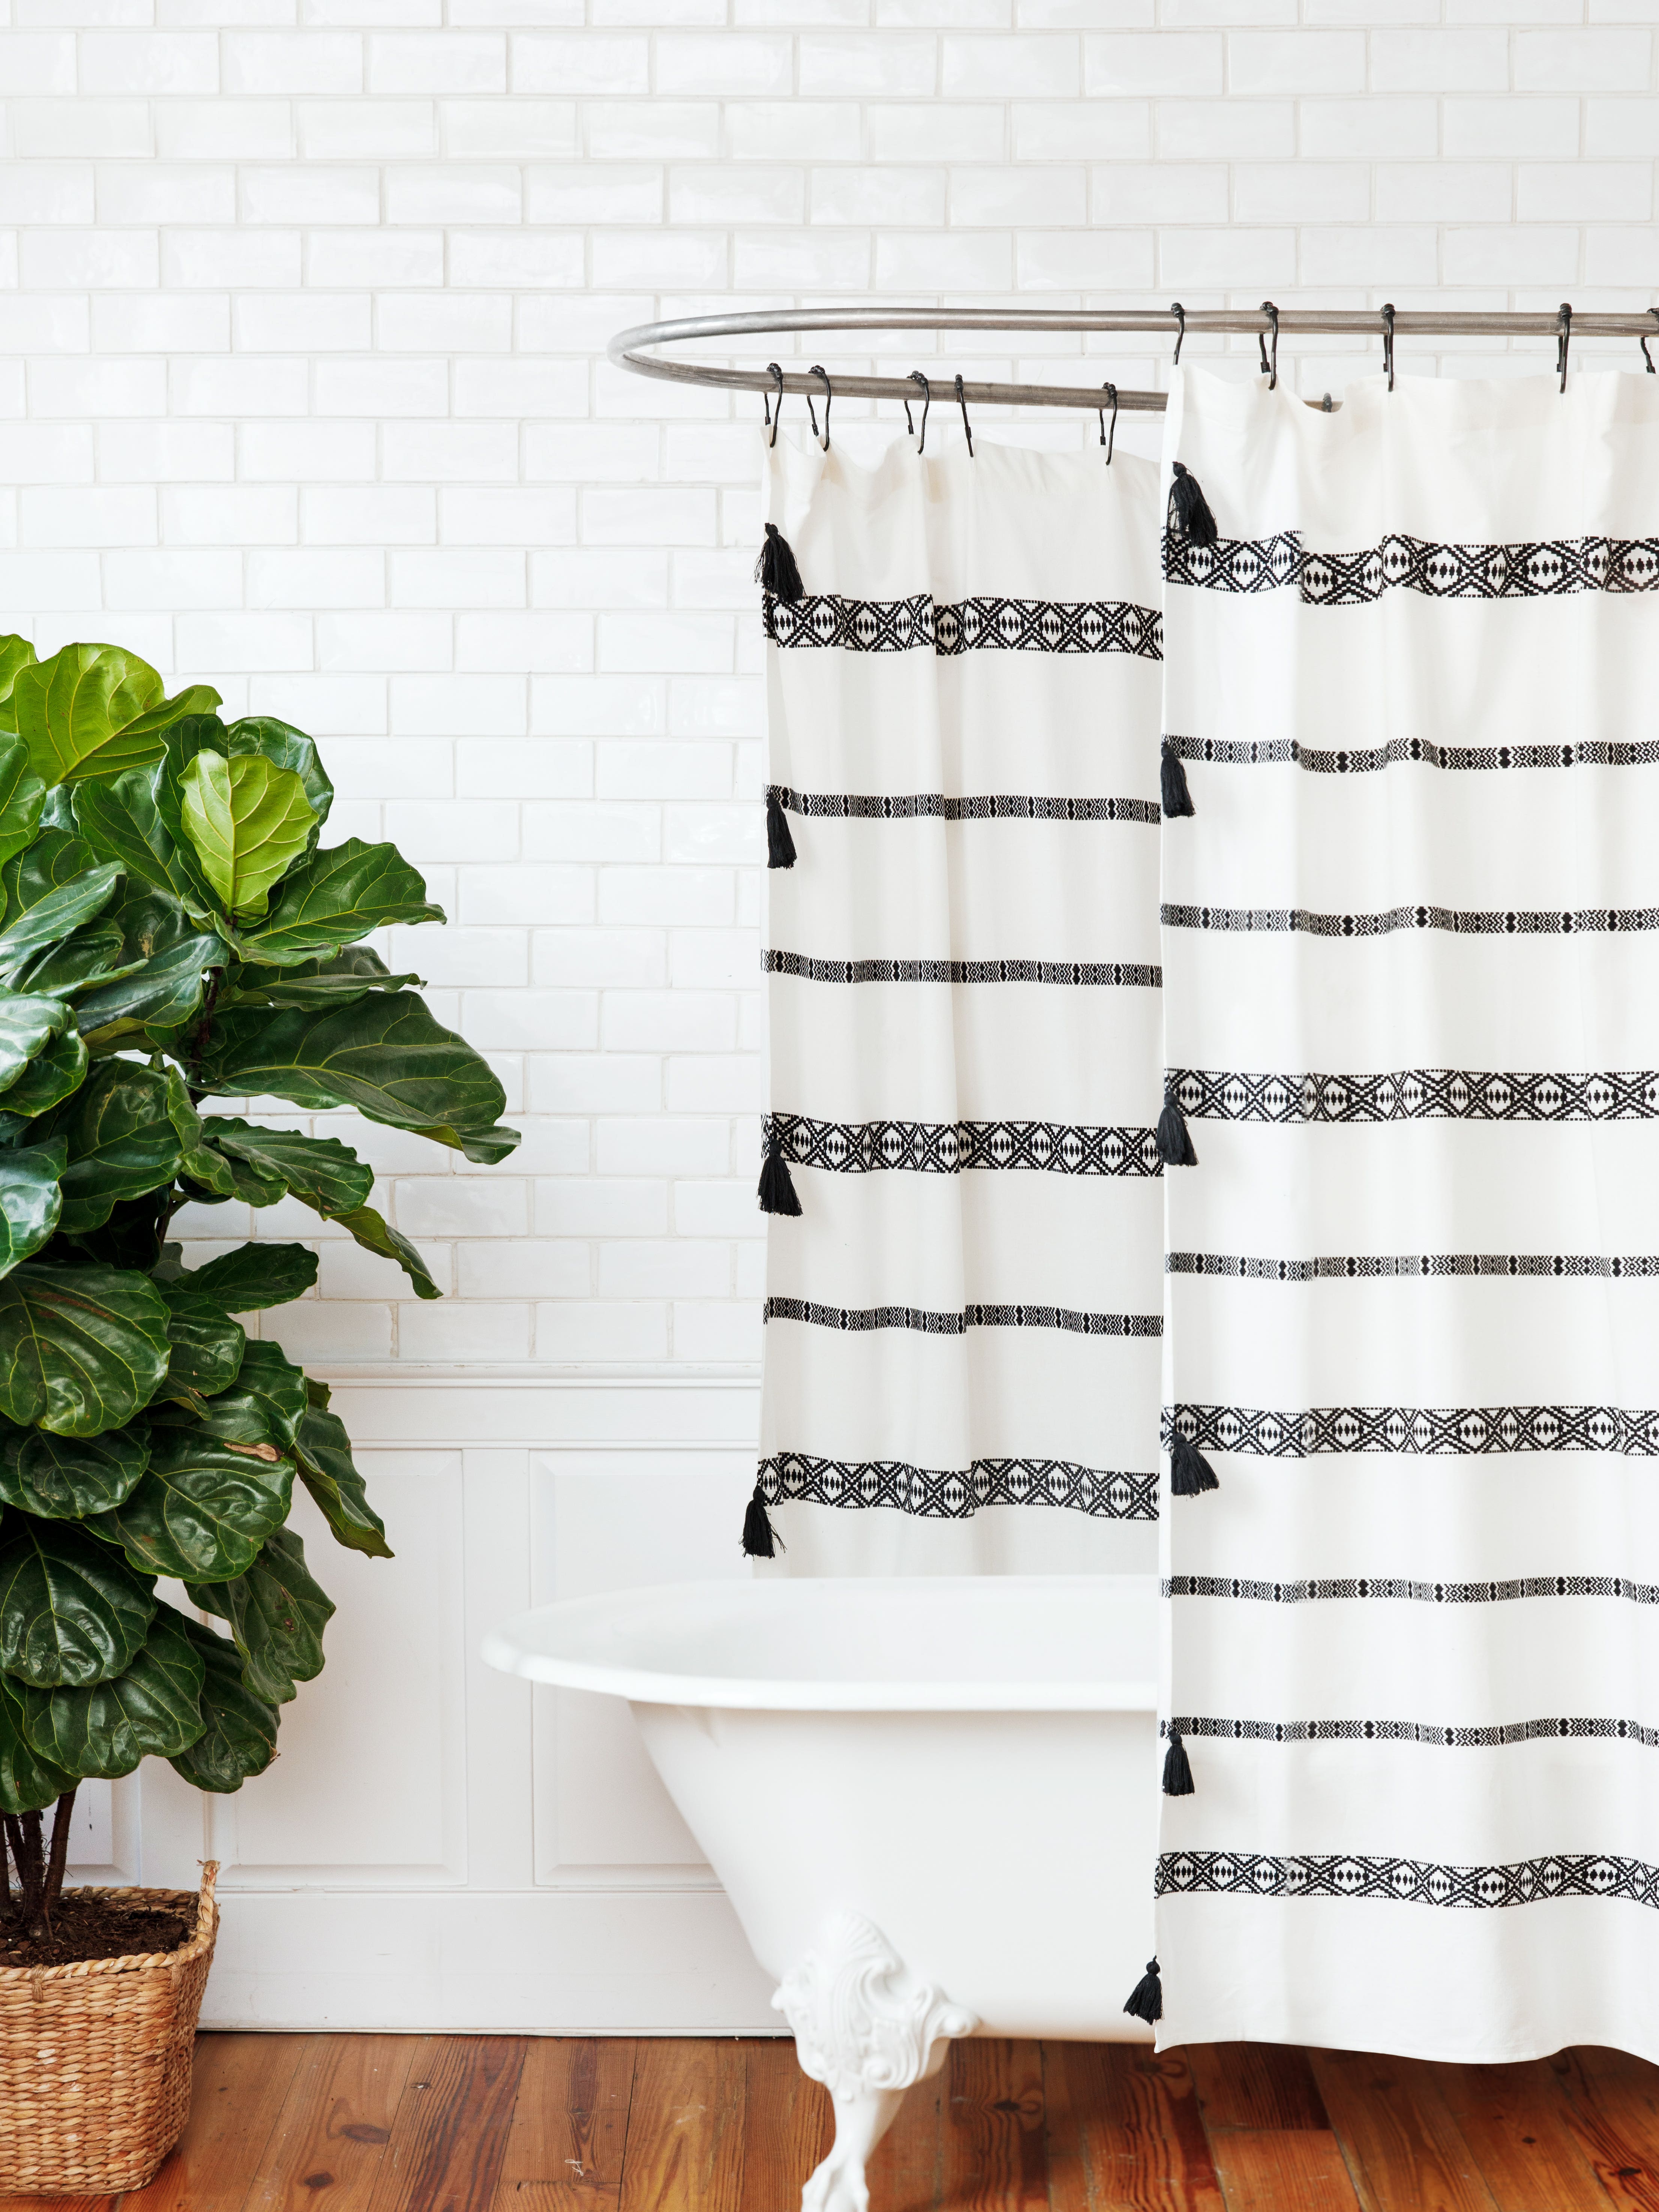 Landlord-Approved Fixes for a Rental Bathroom